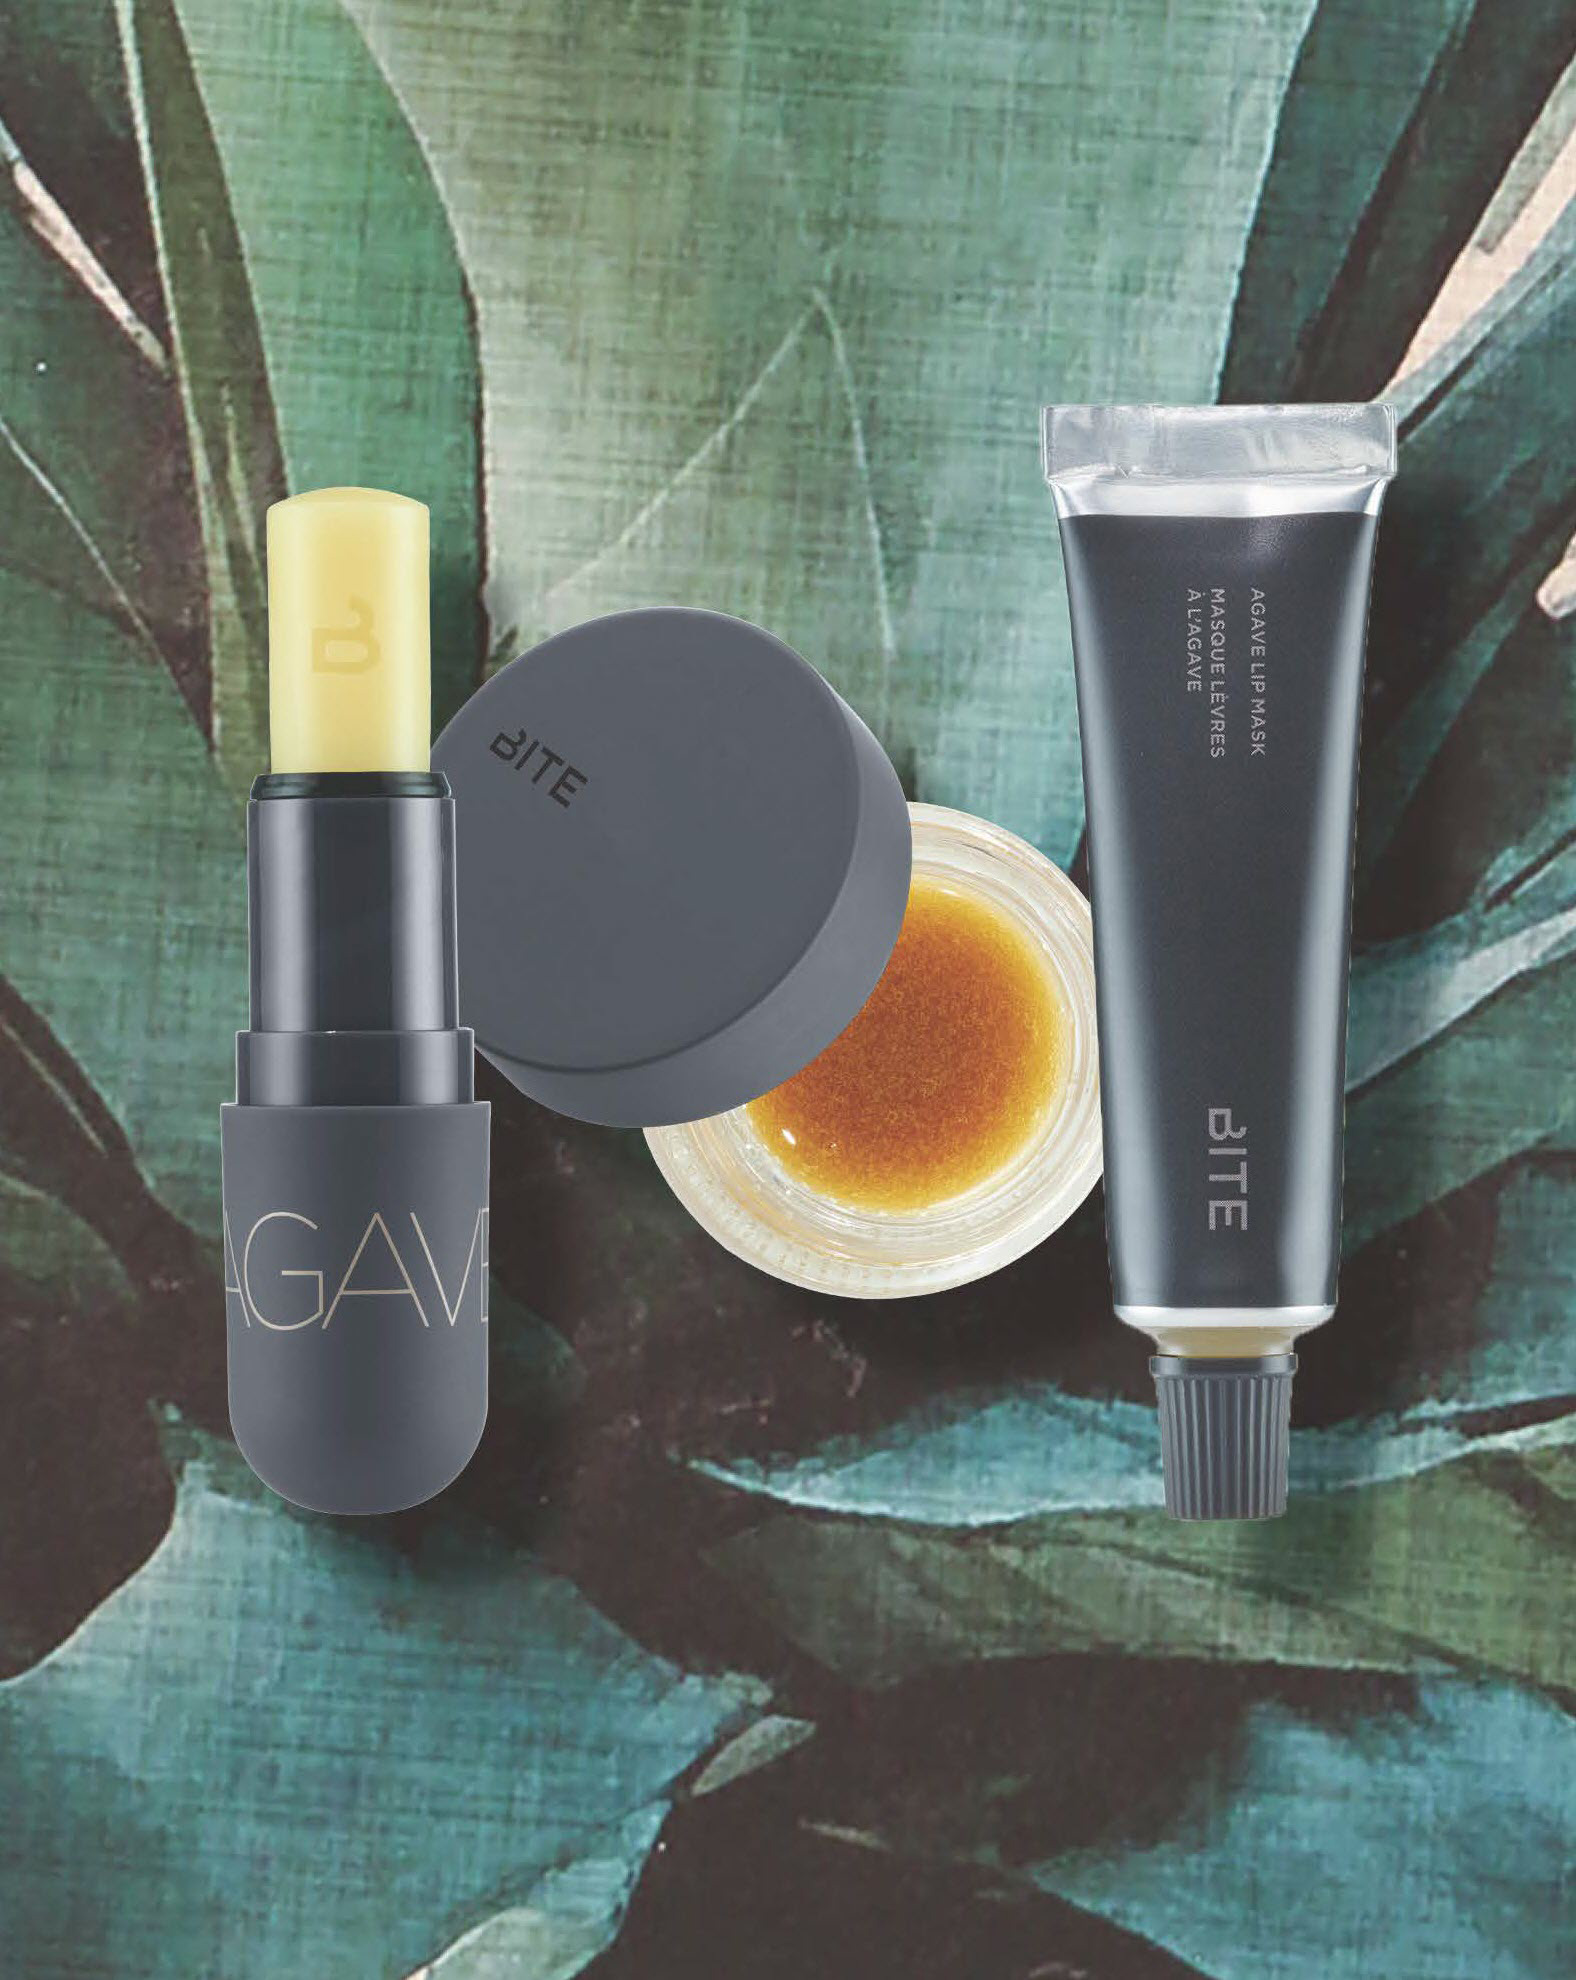 Bite Beauty Everyday Agave Path To Perfect Lips (Agave Lip Balm, Agave Sugar Lip Scrub and Agave Lip Mask)